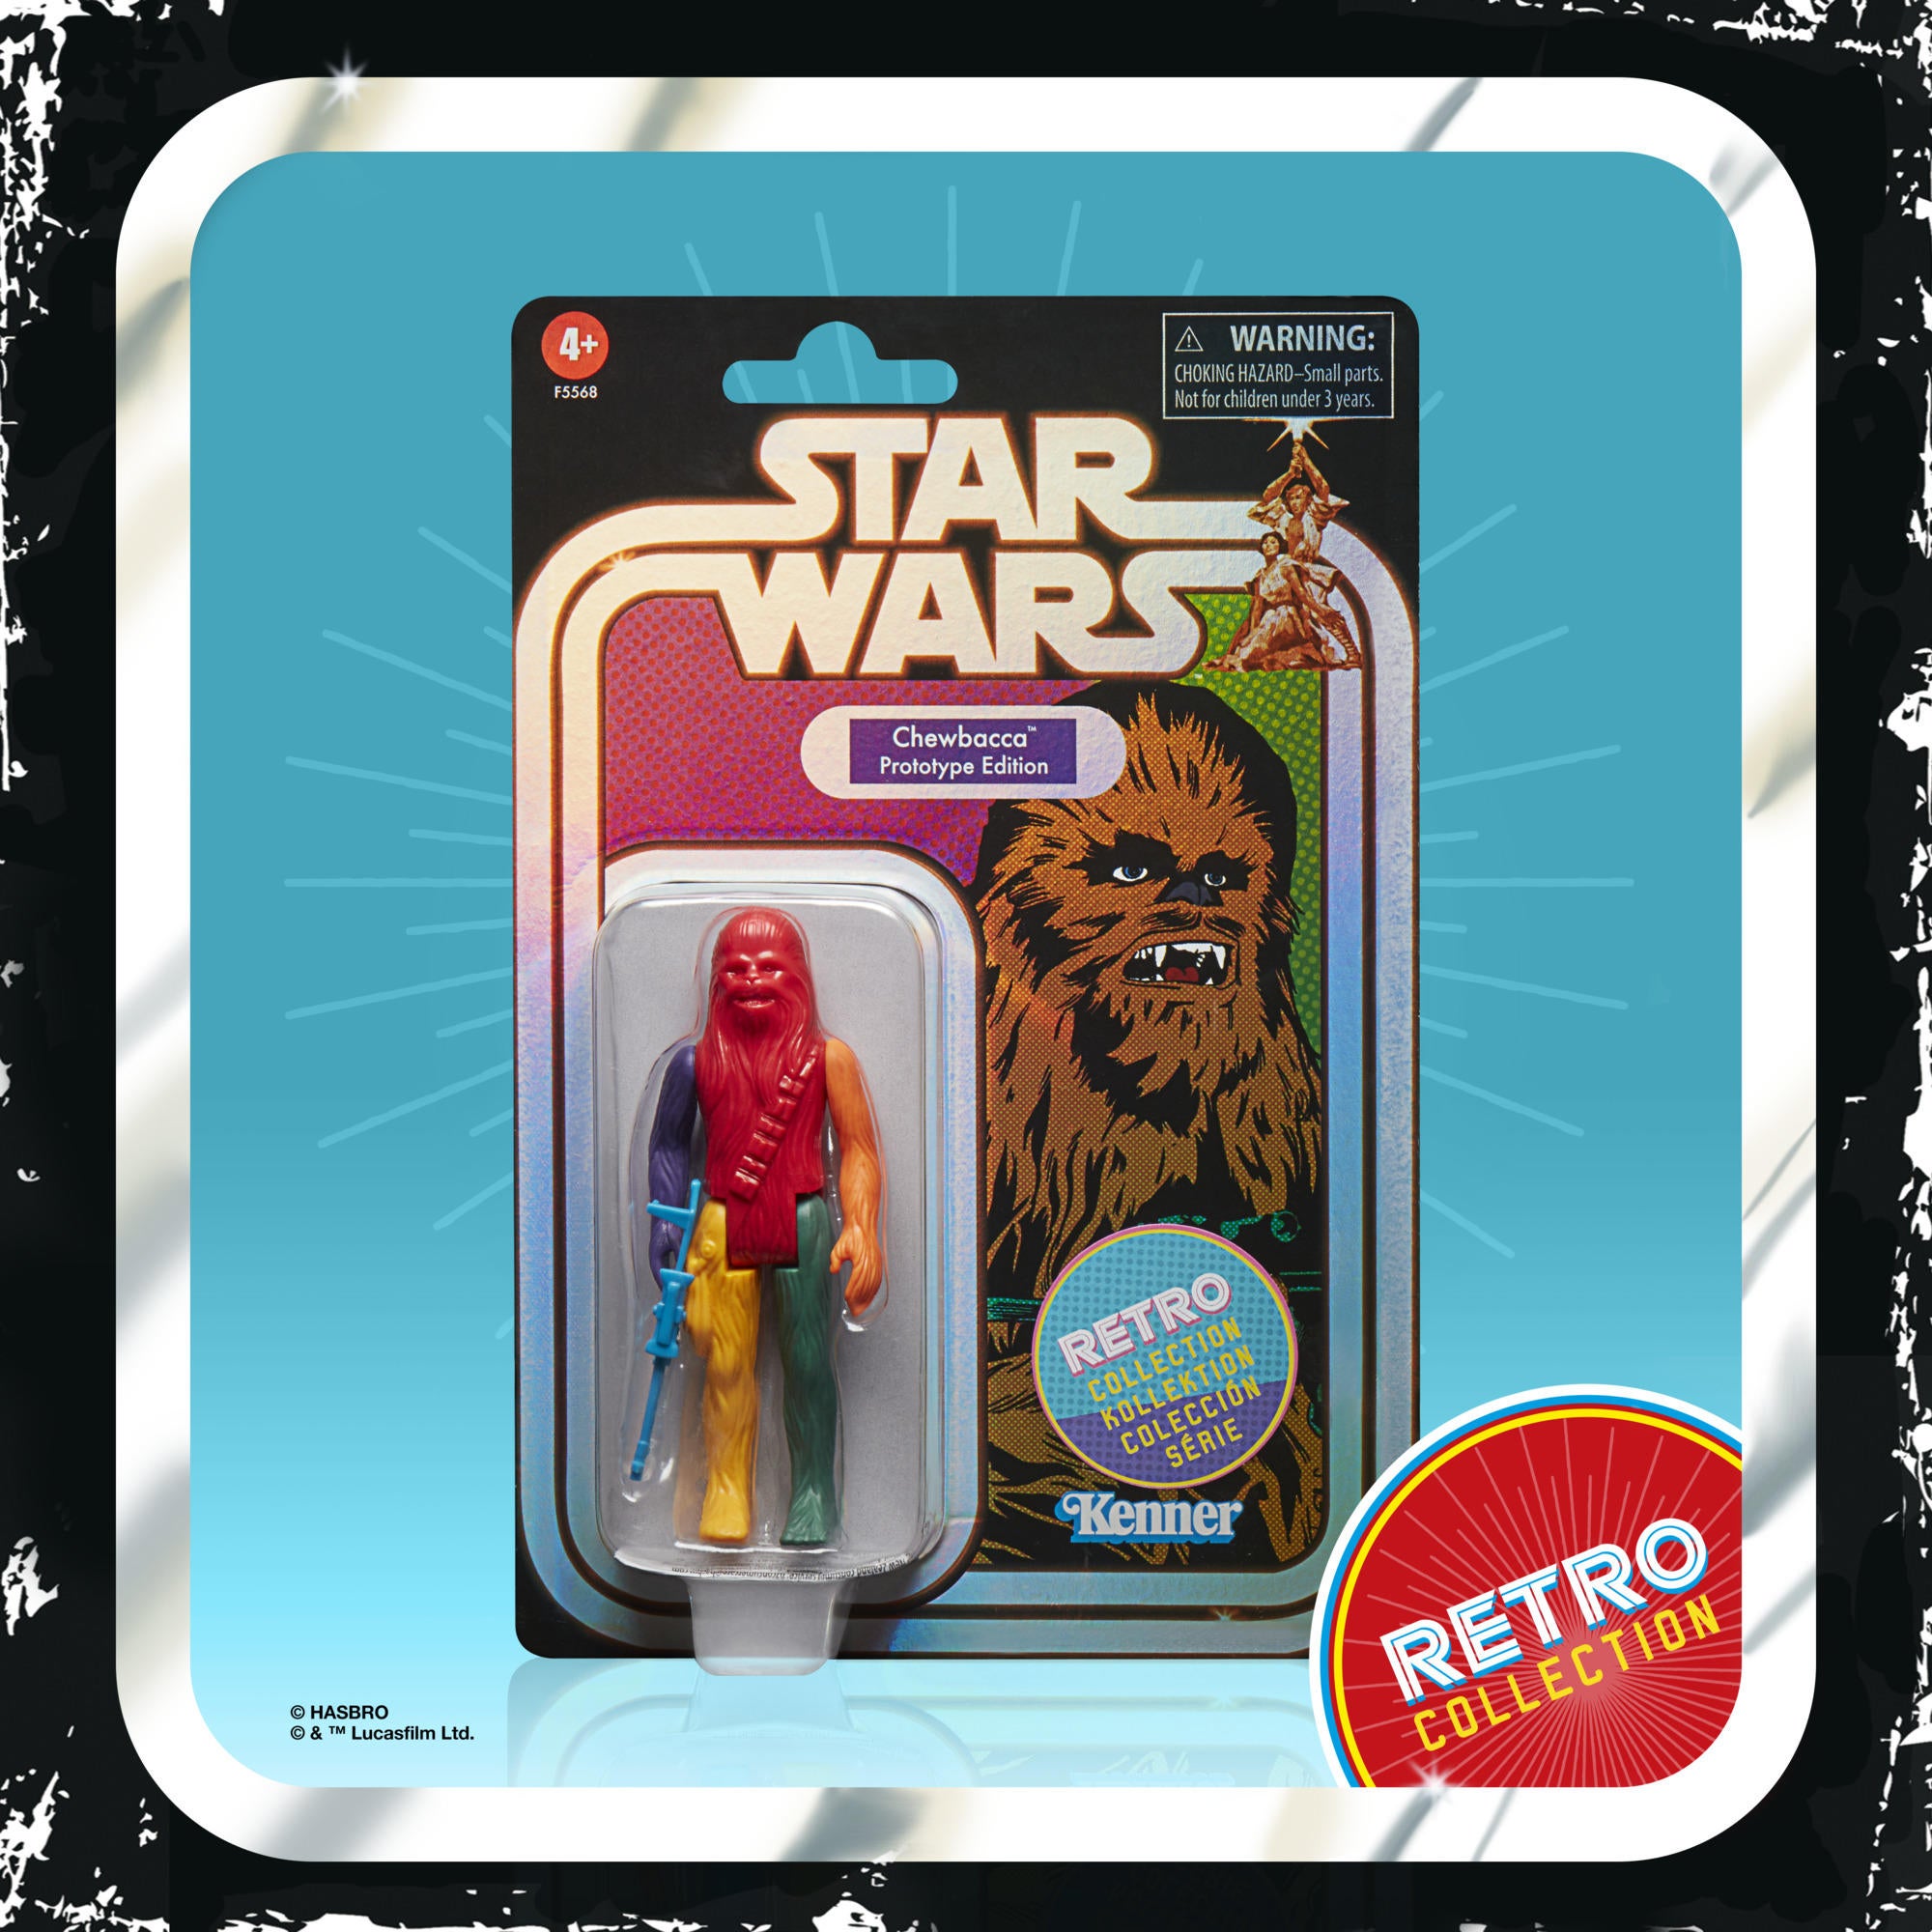 star-wars-retro-collection-3-75-inch-chewbacca-prototype-edition-figure-package.jpg